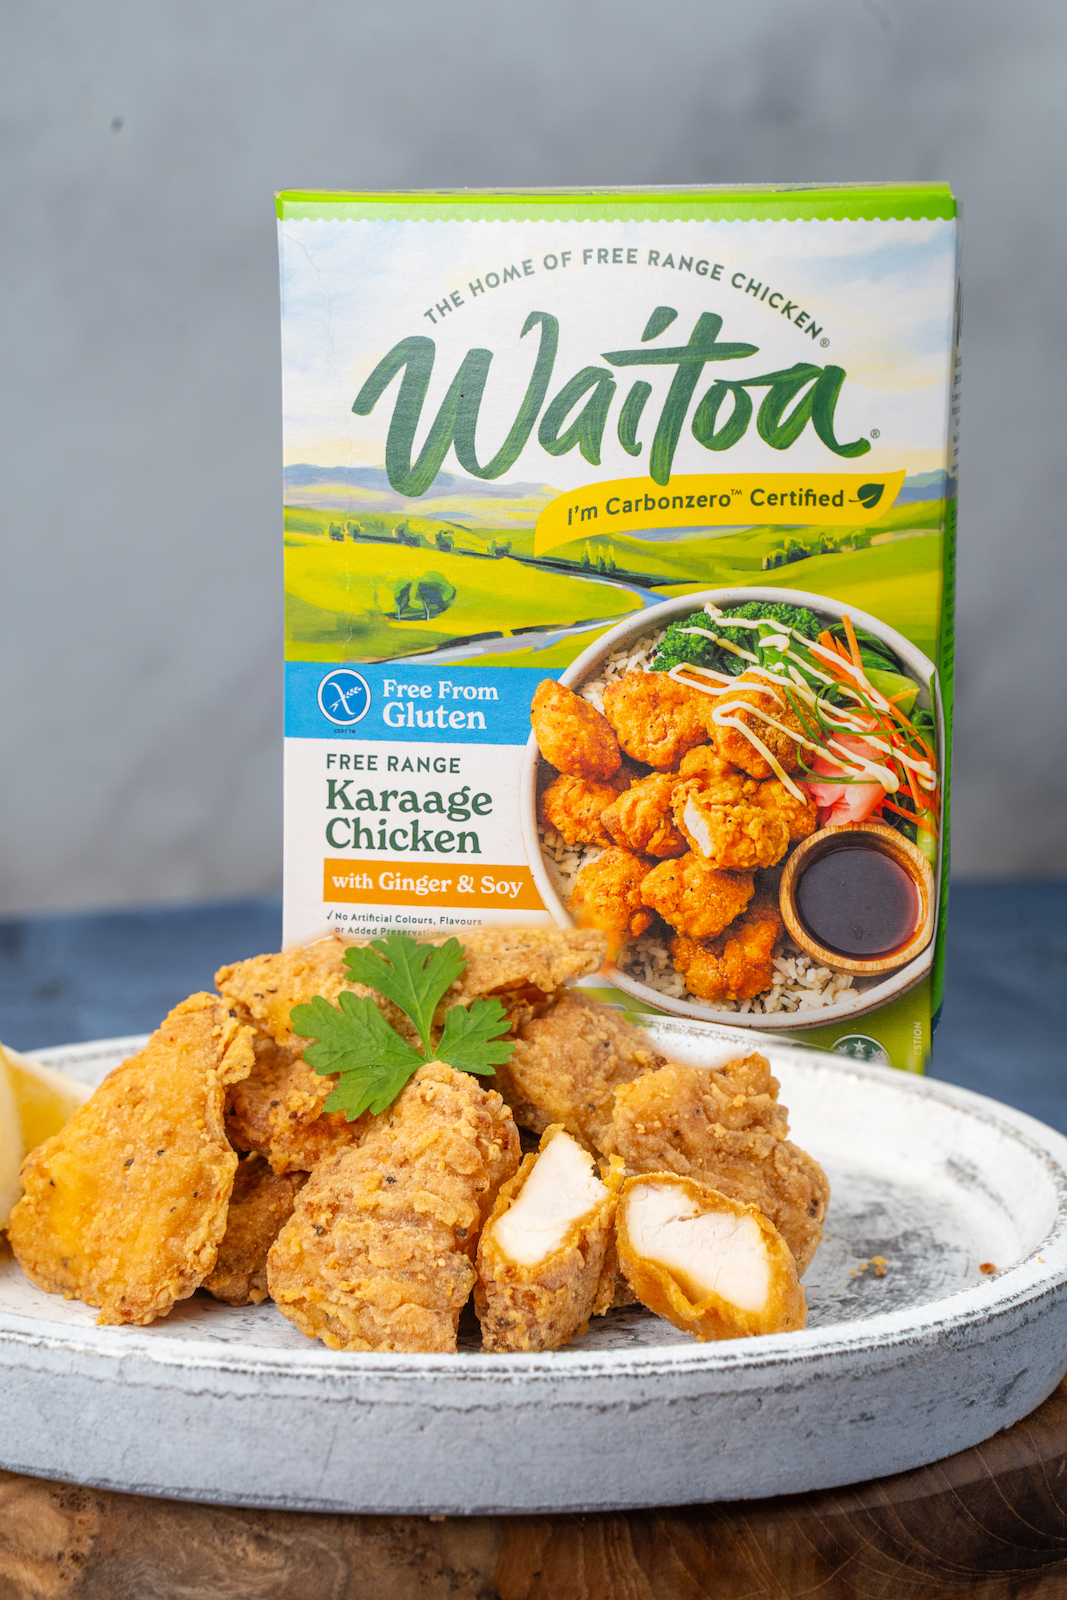 A packet of Waitoa Karaage Chicken with a plate of karaage chicken pieces in the foreground